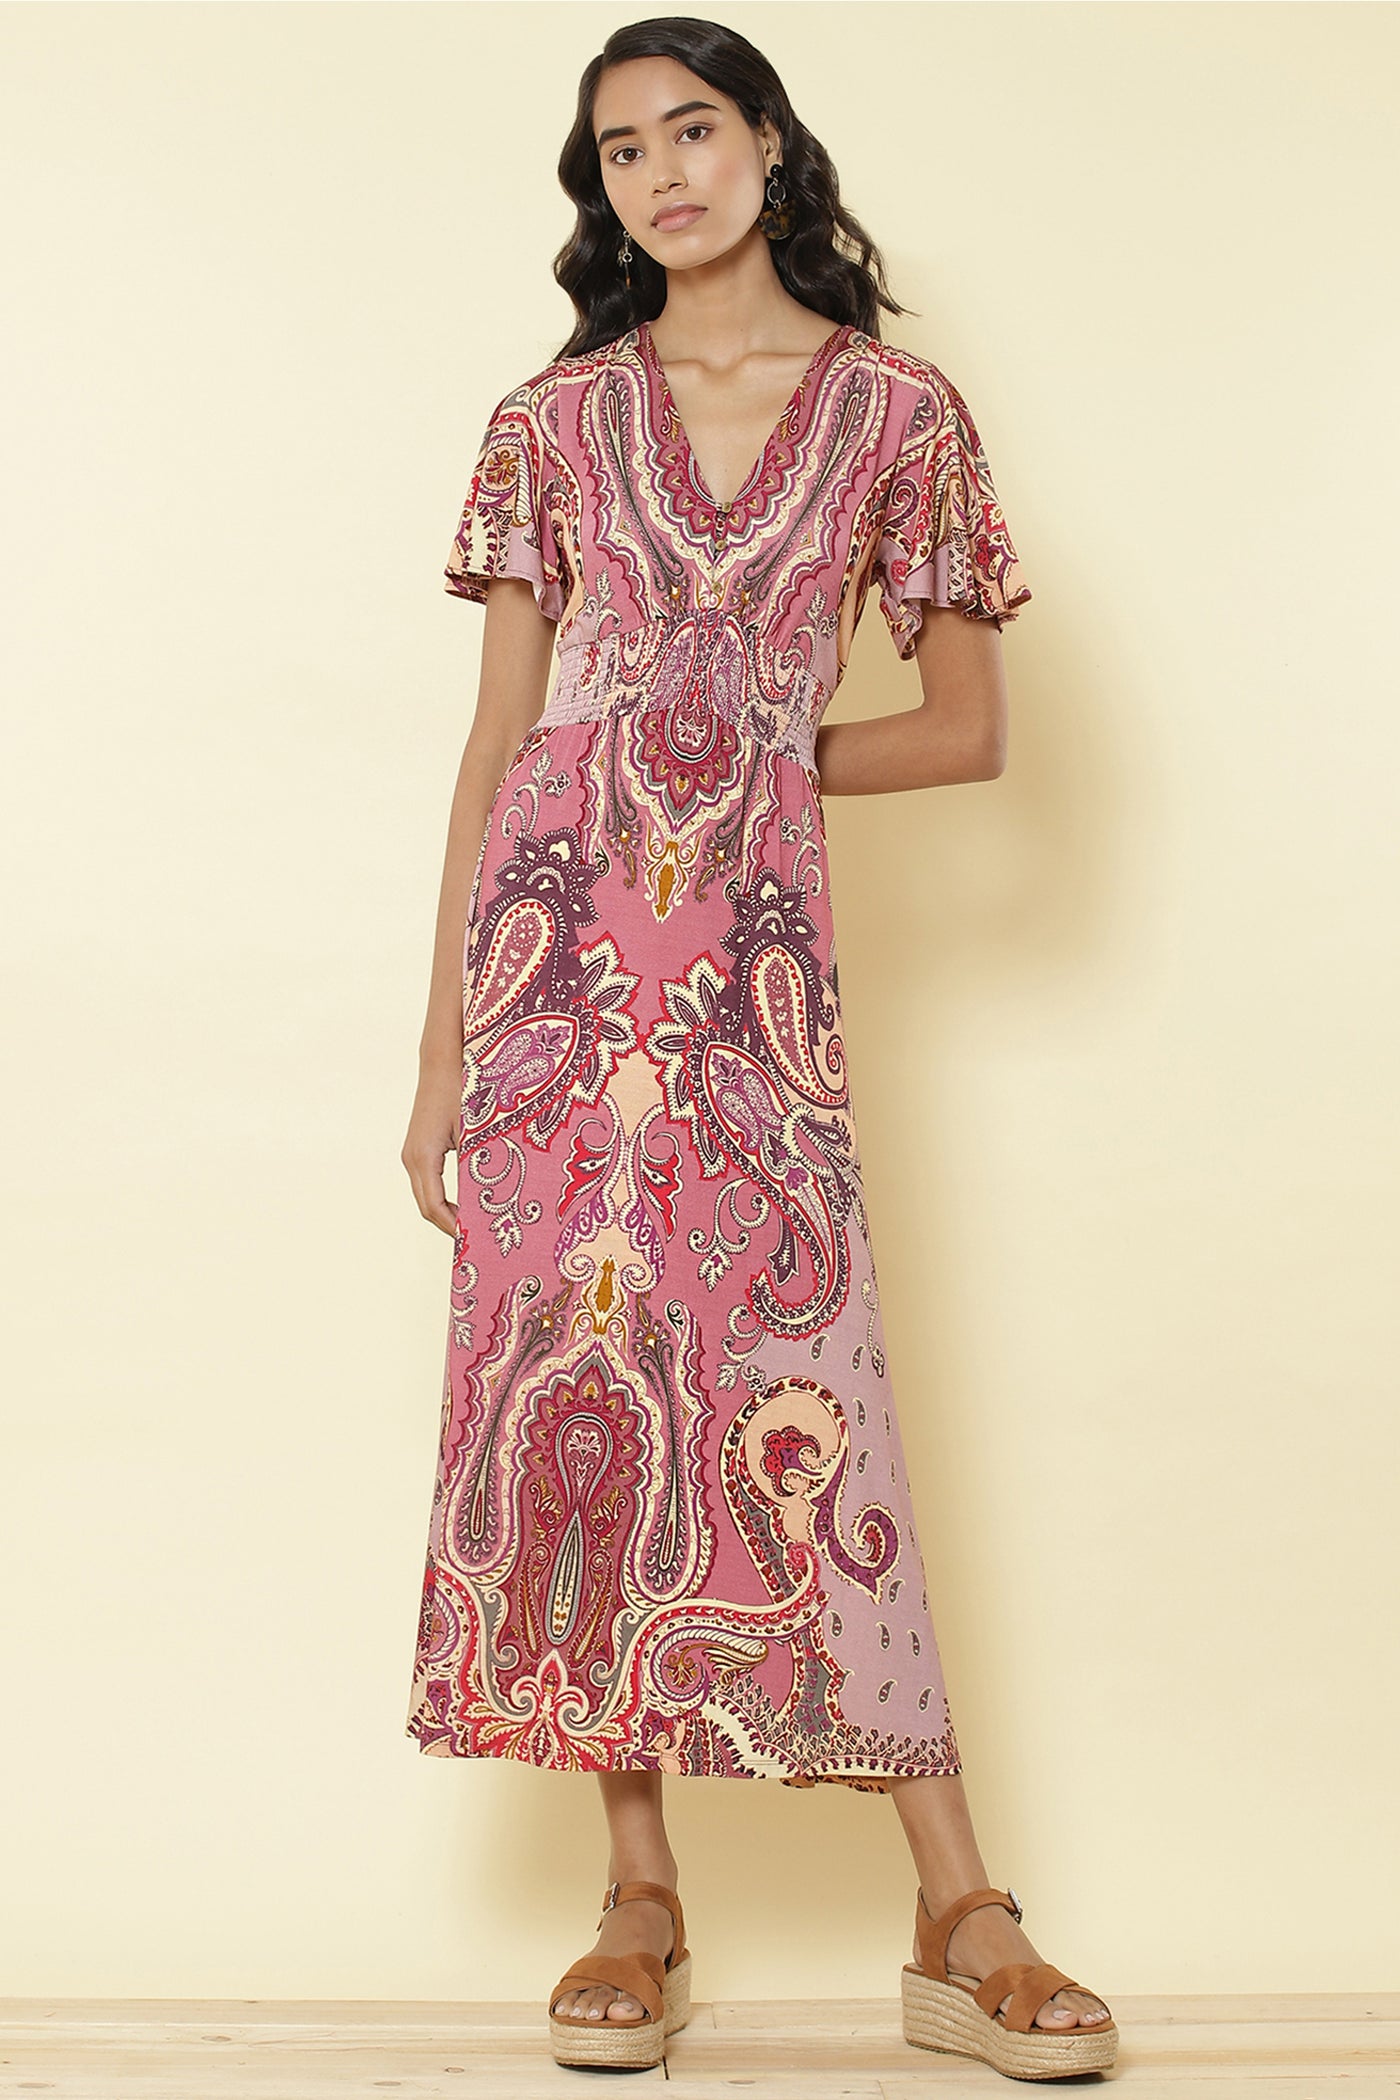 Ritu Kumar - Pink Printed long Dress - Exclusive Indian Designer Wear Latest Collections Available at Melange Singapore.